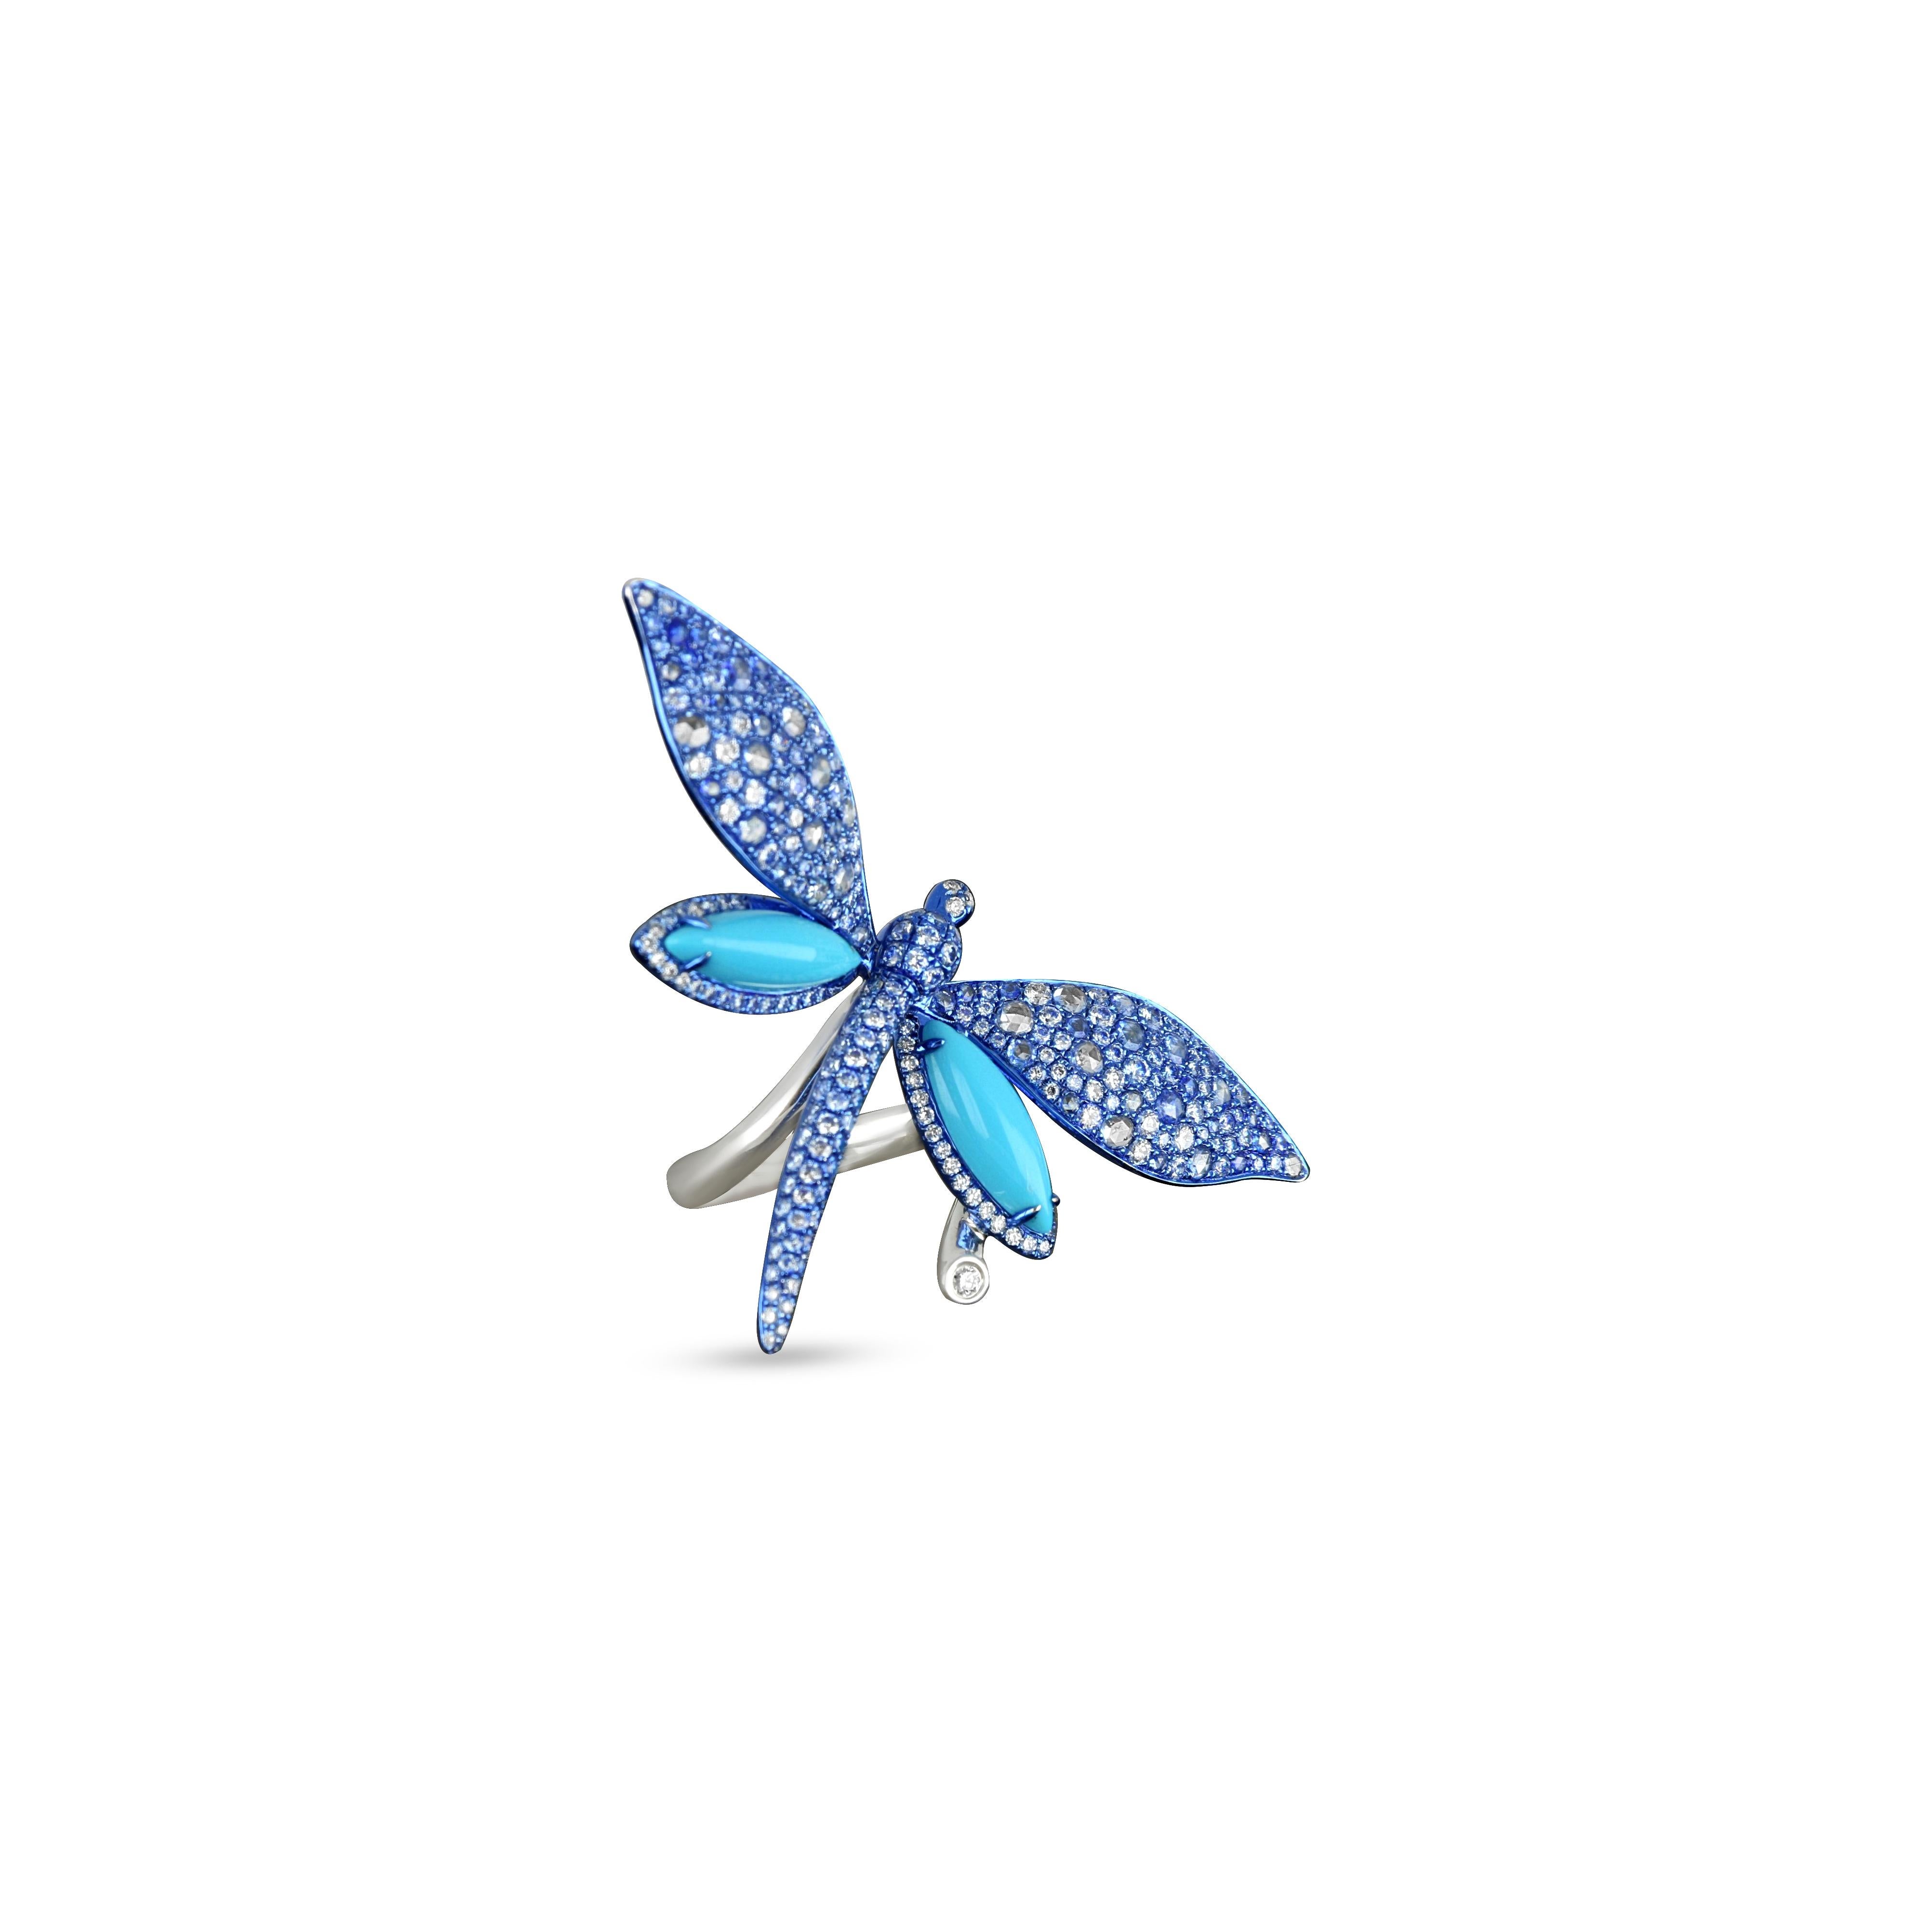 This dragonfly inspired ring is a delicate marvel crafted from white gold of platinum. Its wings, intricately detailed with filigree or engraving, showcase round-cut diamonds that sparkle with movement. A beautiful centrepiece is a captivating